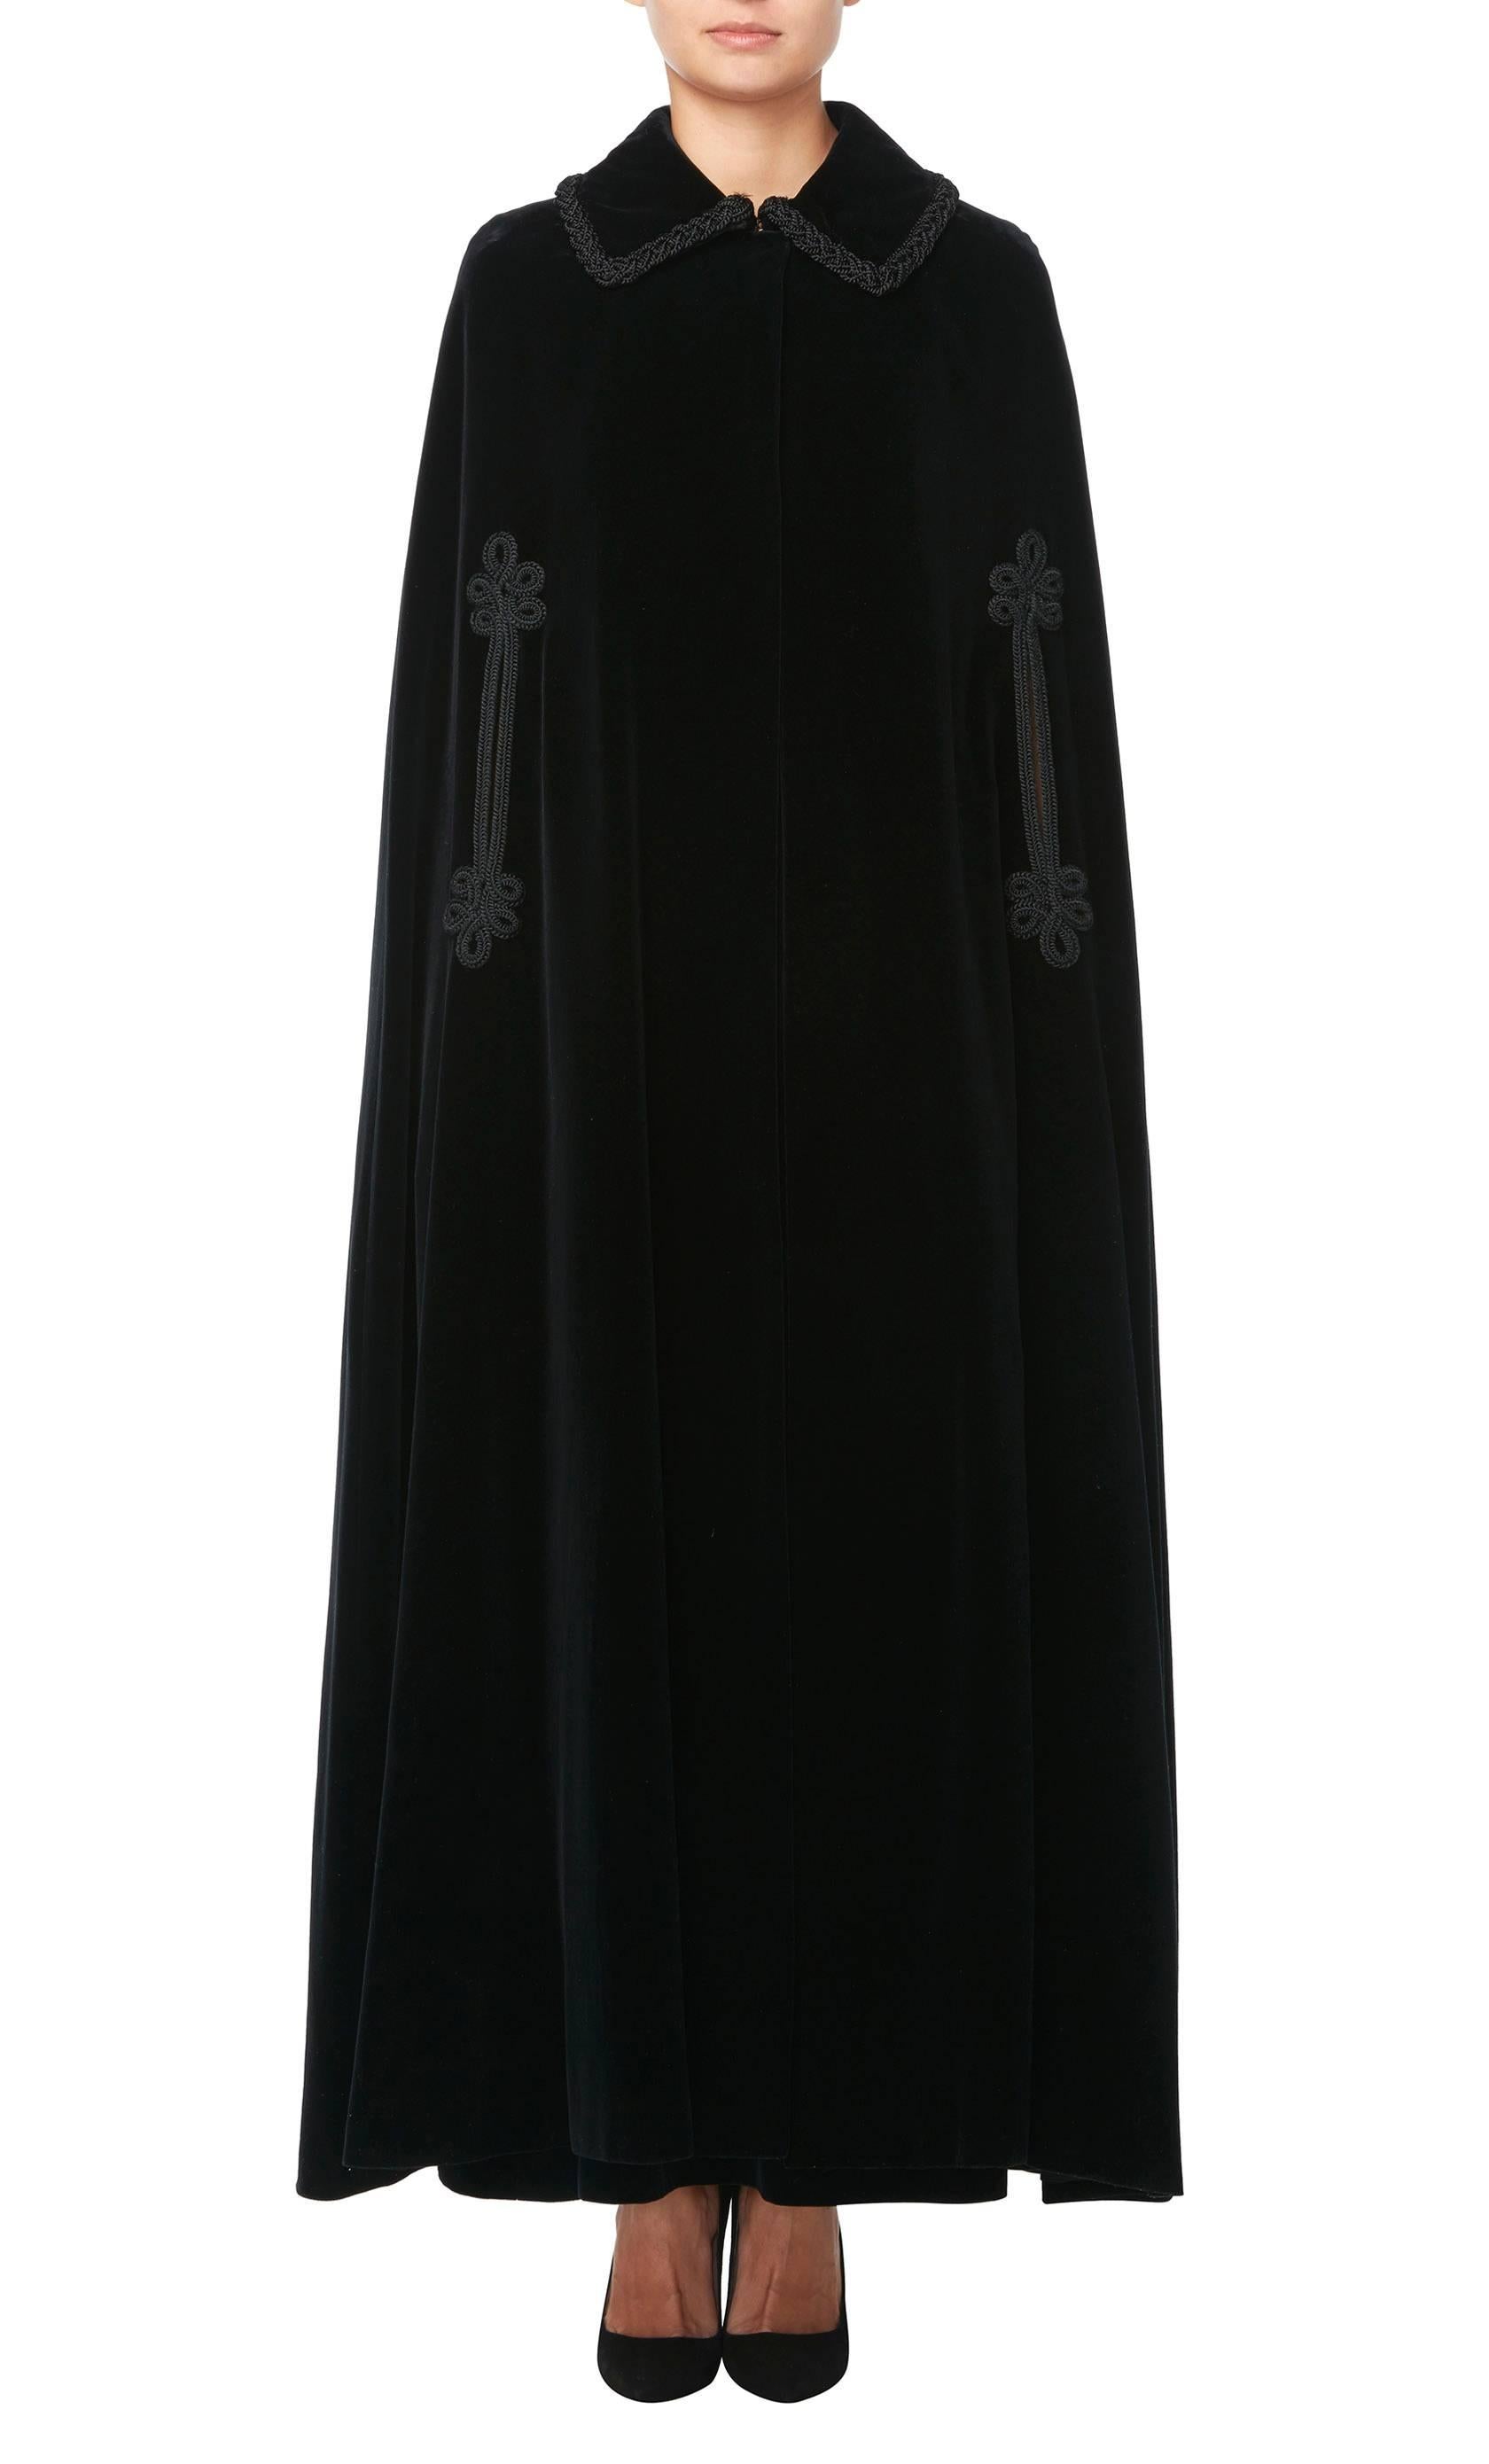 A dramatic evening ensemble, this Jean Patou two-piece is made up of a full-length cape and maxi skirt in matching black velvet. The cape features a collar and a single hook and eye fastening at the neck, allowing a glimpse of the outfit beneath.